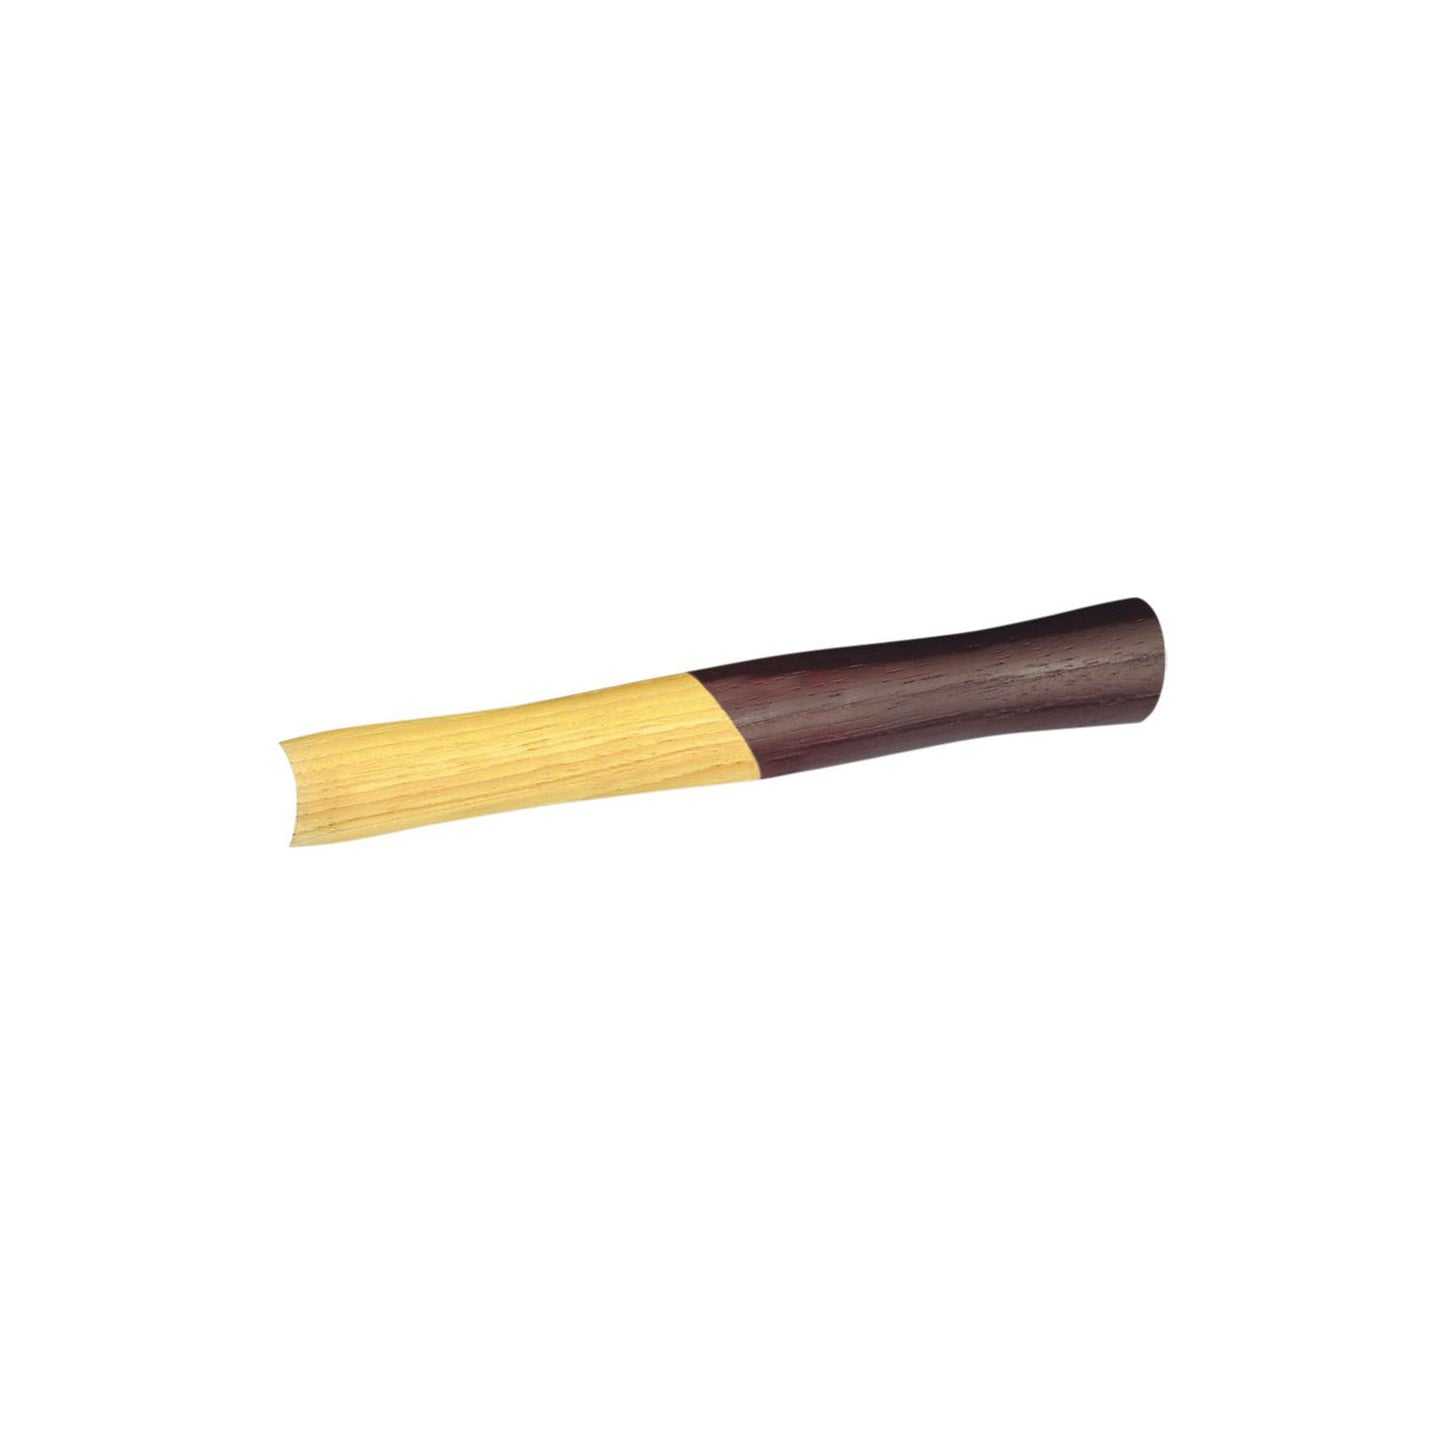 GEDORE E 248 H-25 - Walnut replacement handle 28cm (8739690)